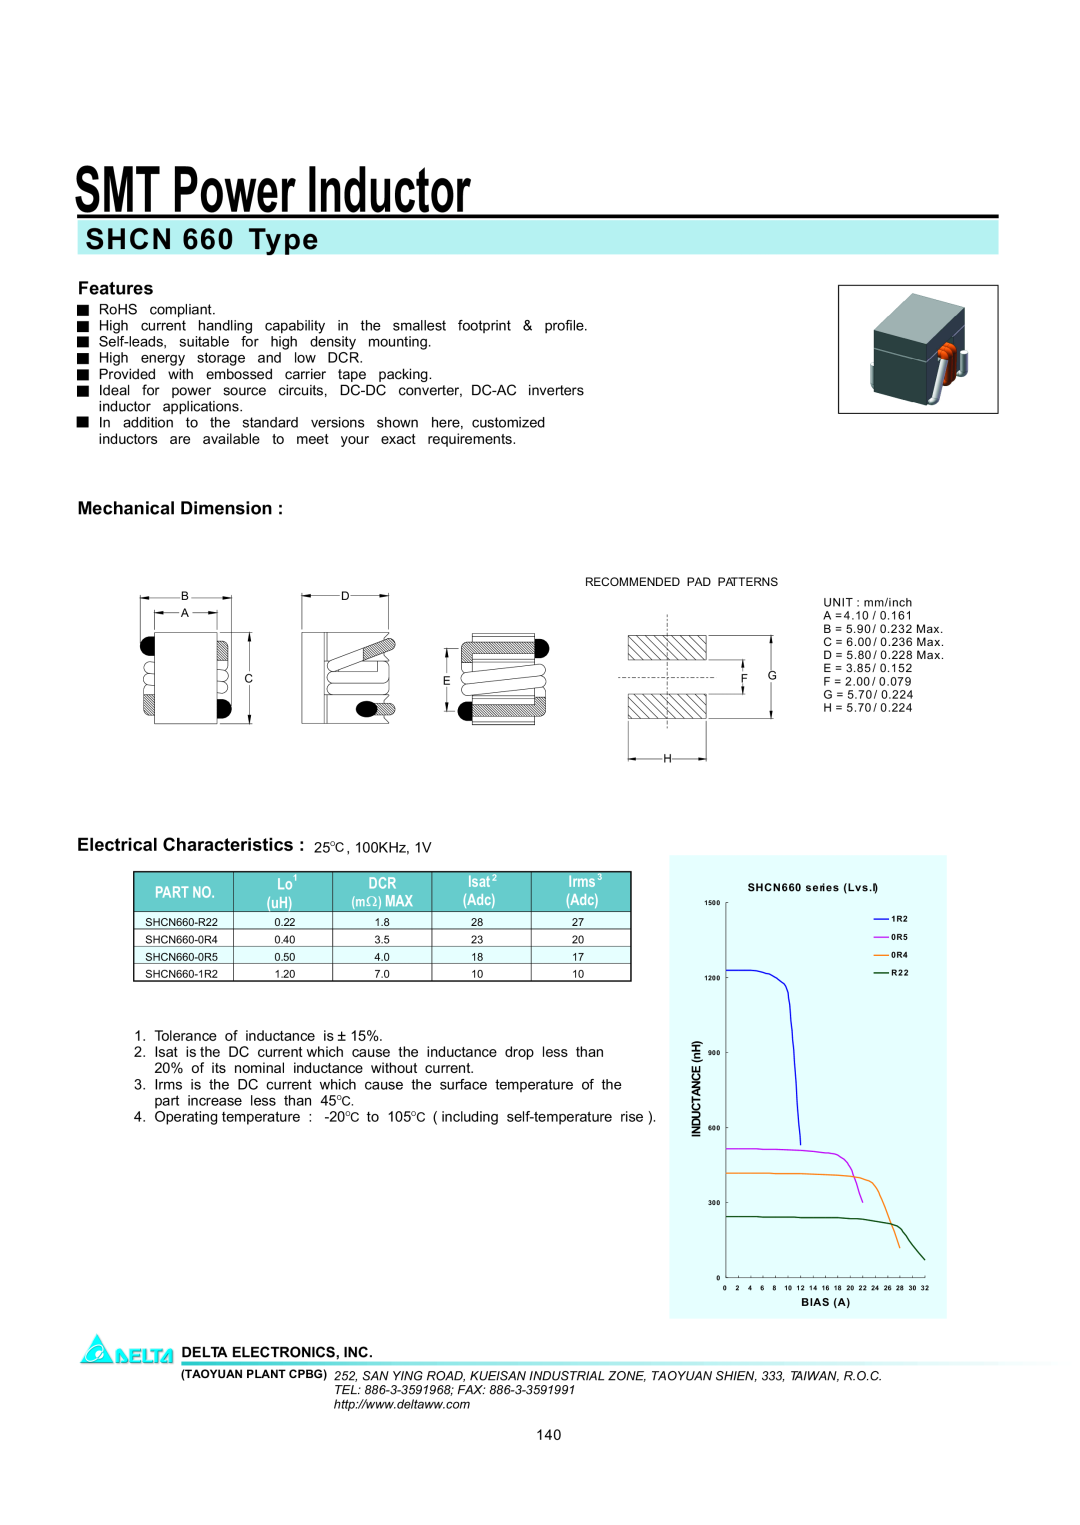 Delta Electronics manual SMT Power Inductor, SHCN 660 Type, Features, Mechanical Dimension, Isat, Irms3 